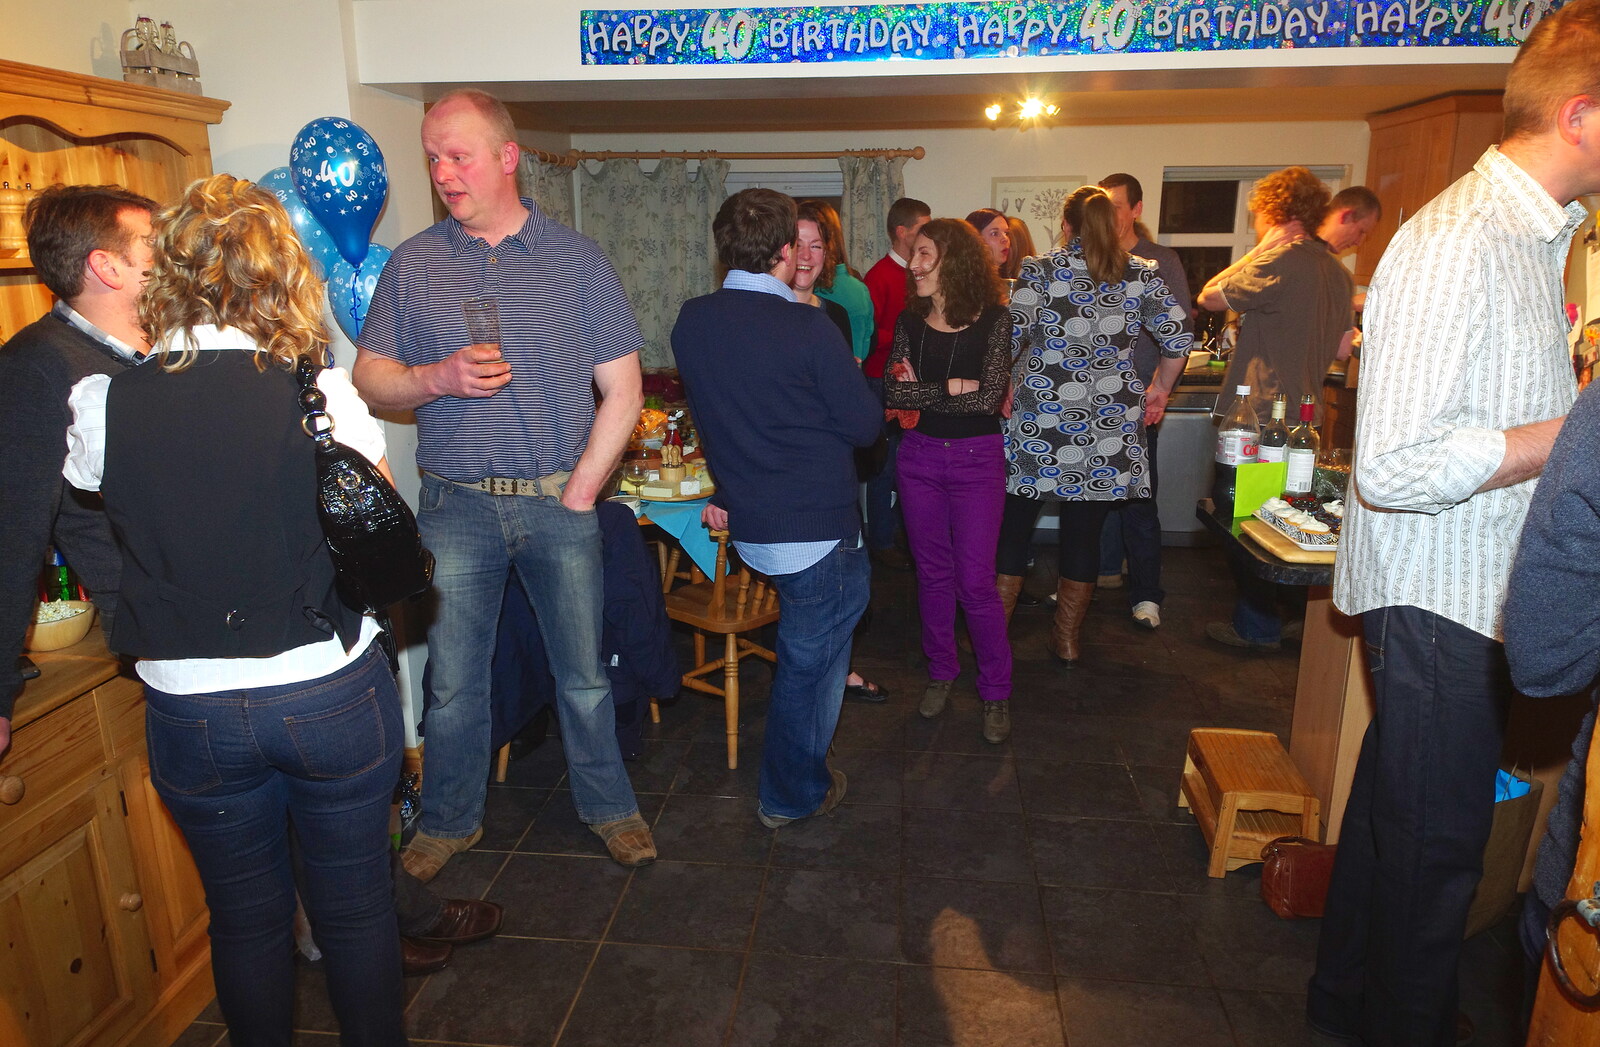 More kitchen action from Mikey P and Andy's 40th Birthday, Thorpe Abbots, Norfolk - 16th March 2013